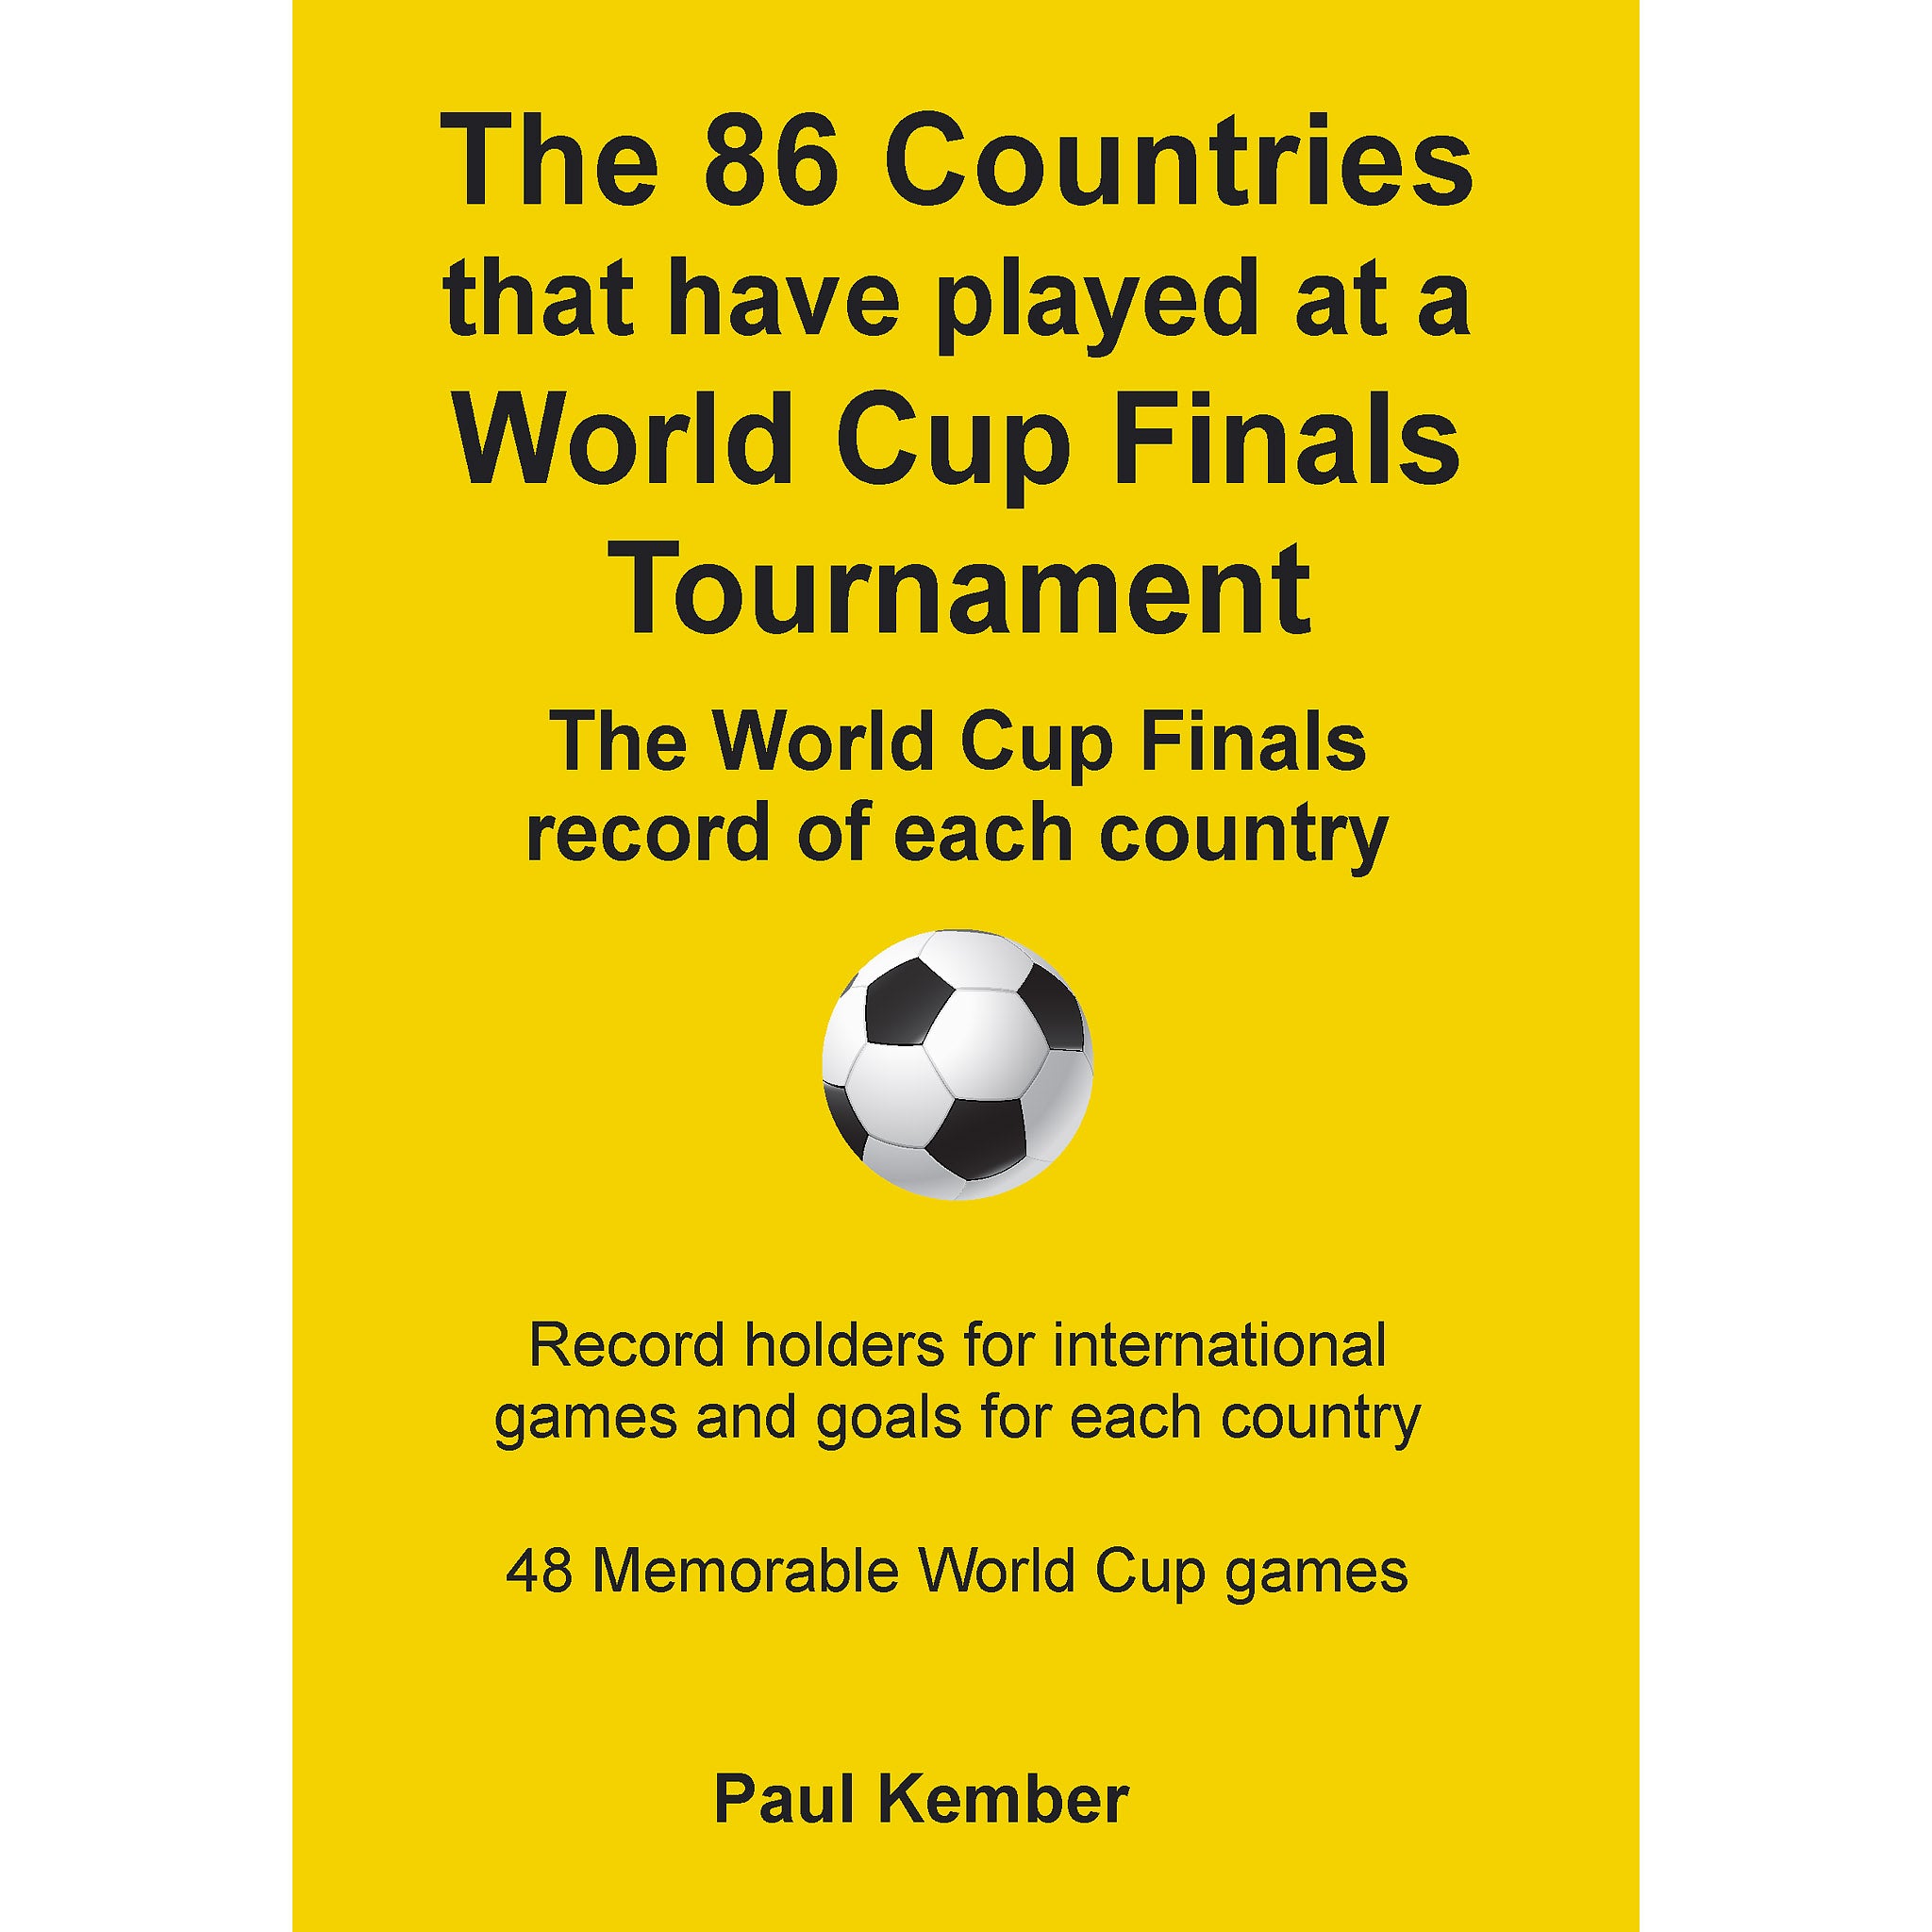 The 86 Countries that have played at a World Cup Finals Tournament